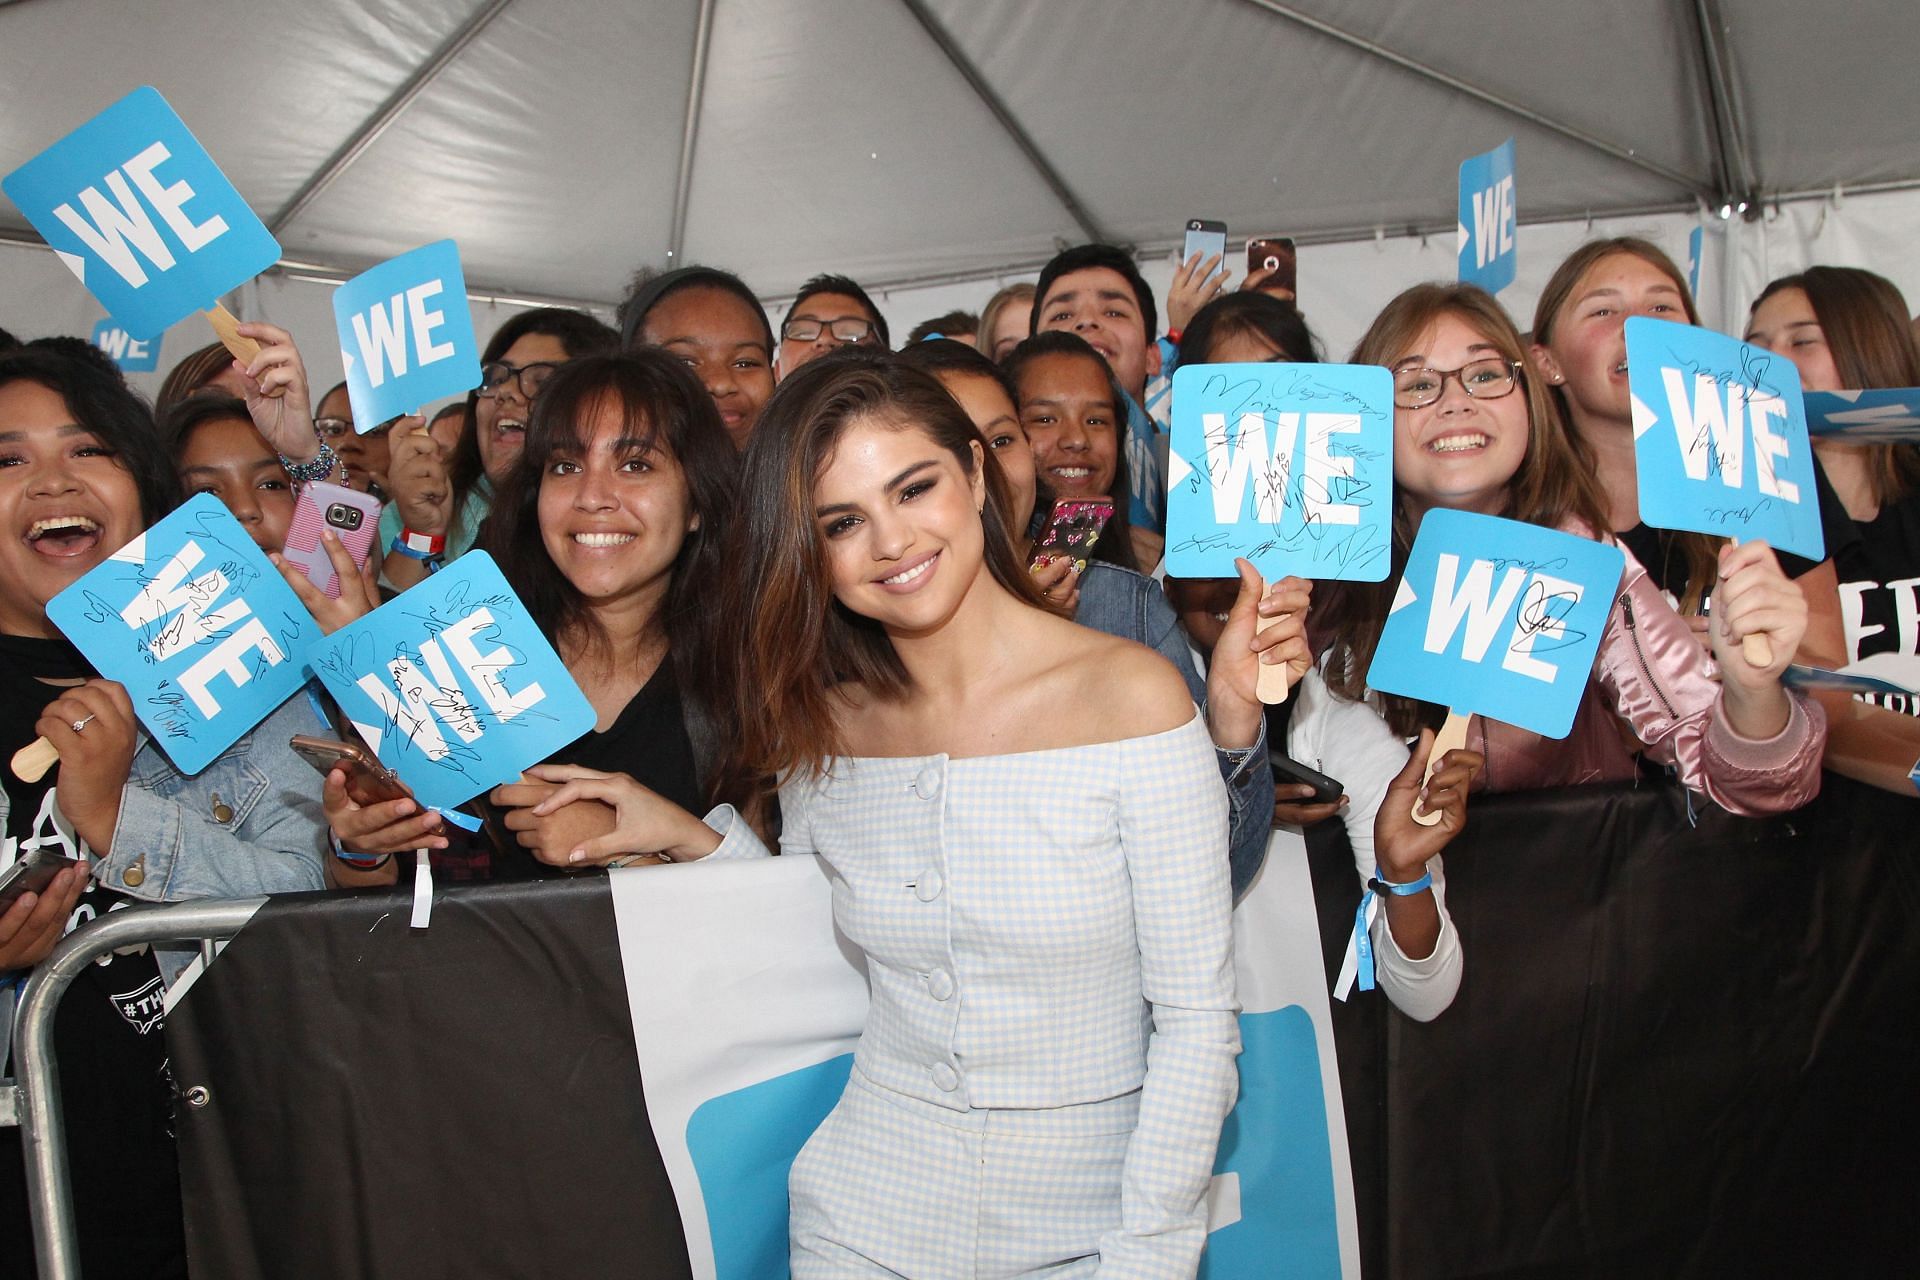 Selena Gomez, Alicia Keys, Demi Lovato, Bryan Cranston, DJ Khaled, Miss Piggy And More Come Together At WE Day California To Celebrate Young People Changing The World. (Photo by Tommaso Boddi/Getty Images for WE)